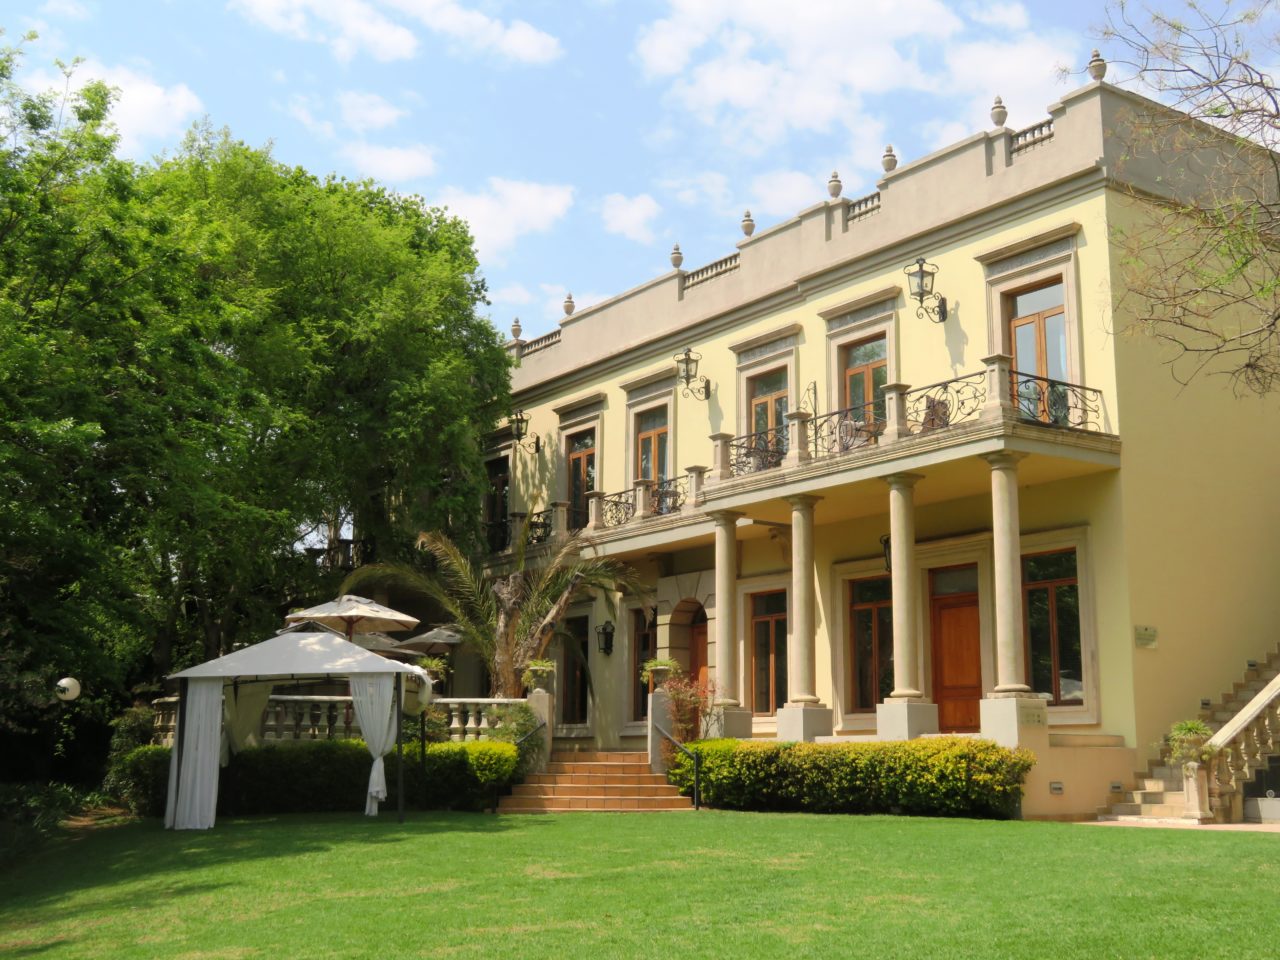 Fairlawns Boutique Hotel & Spa - Johannesburg, South Africa